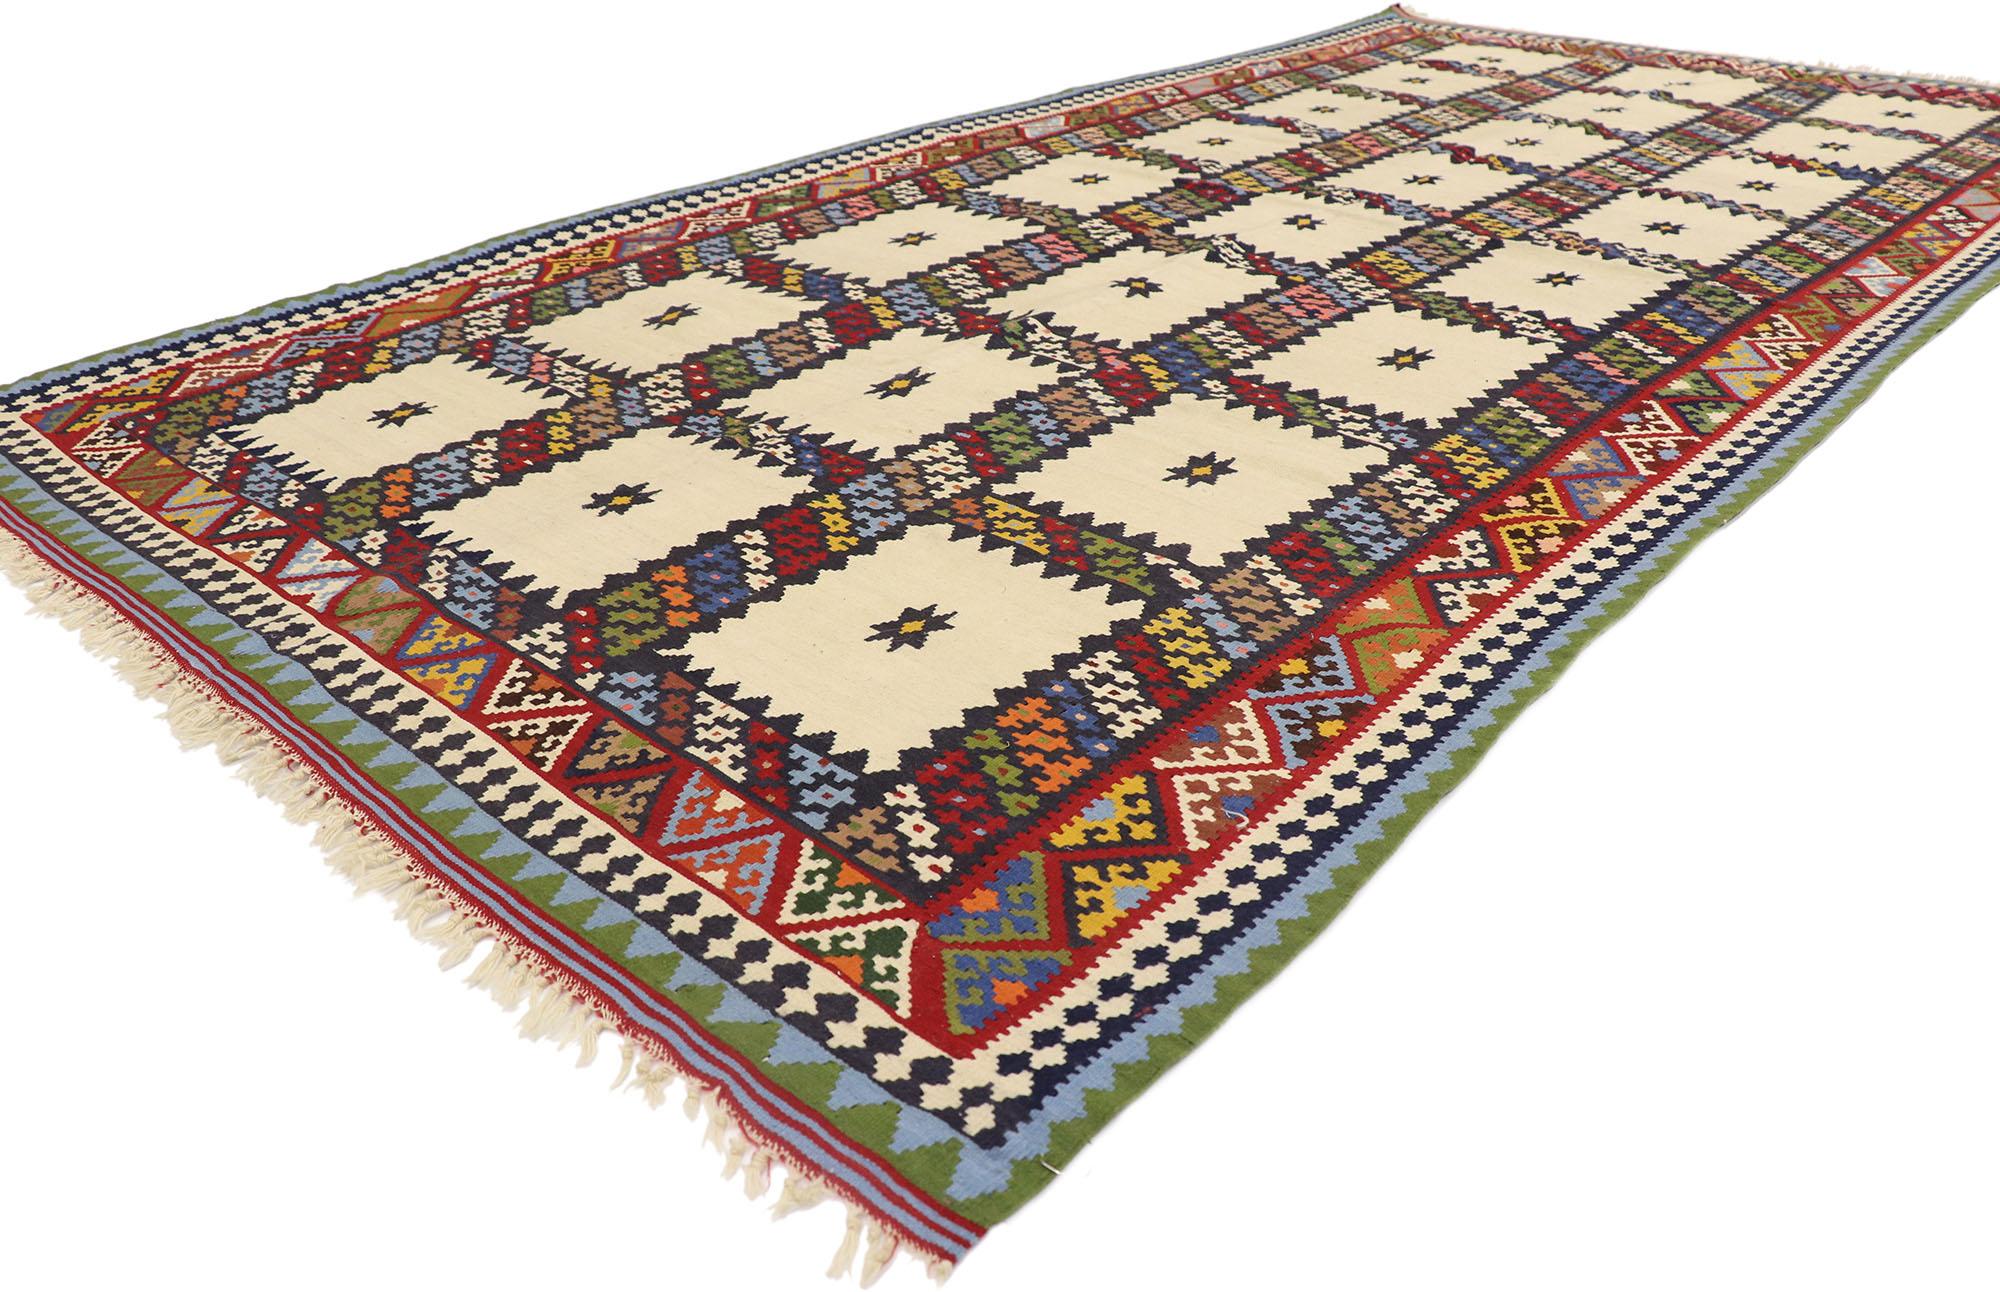 77941 Vintage Persian Bijar Kilim Rug, 04'11 x 09'08.

Embark on an enchanting journey where nomadic charm gracefully converges with tribal enchantment in our handwoven wool vintage Persian Bijar kilim rug. Rooted in tradition, this flatweave rug